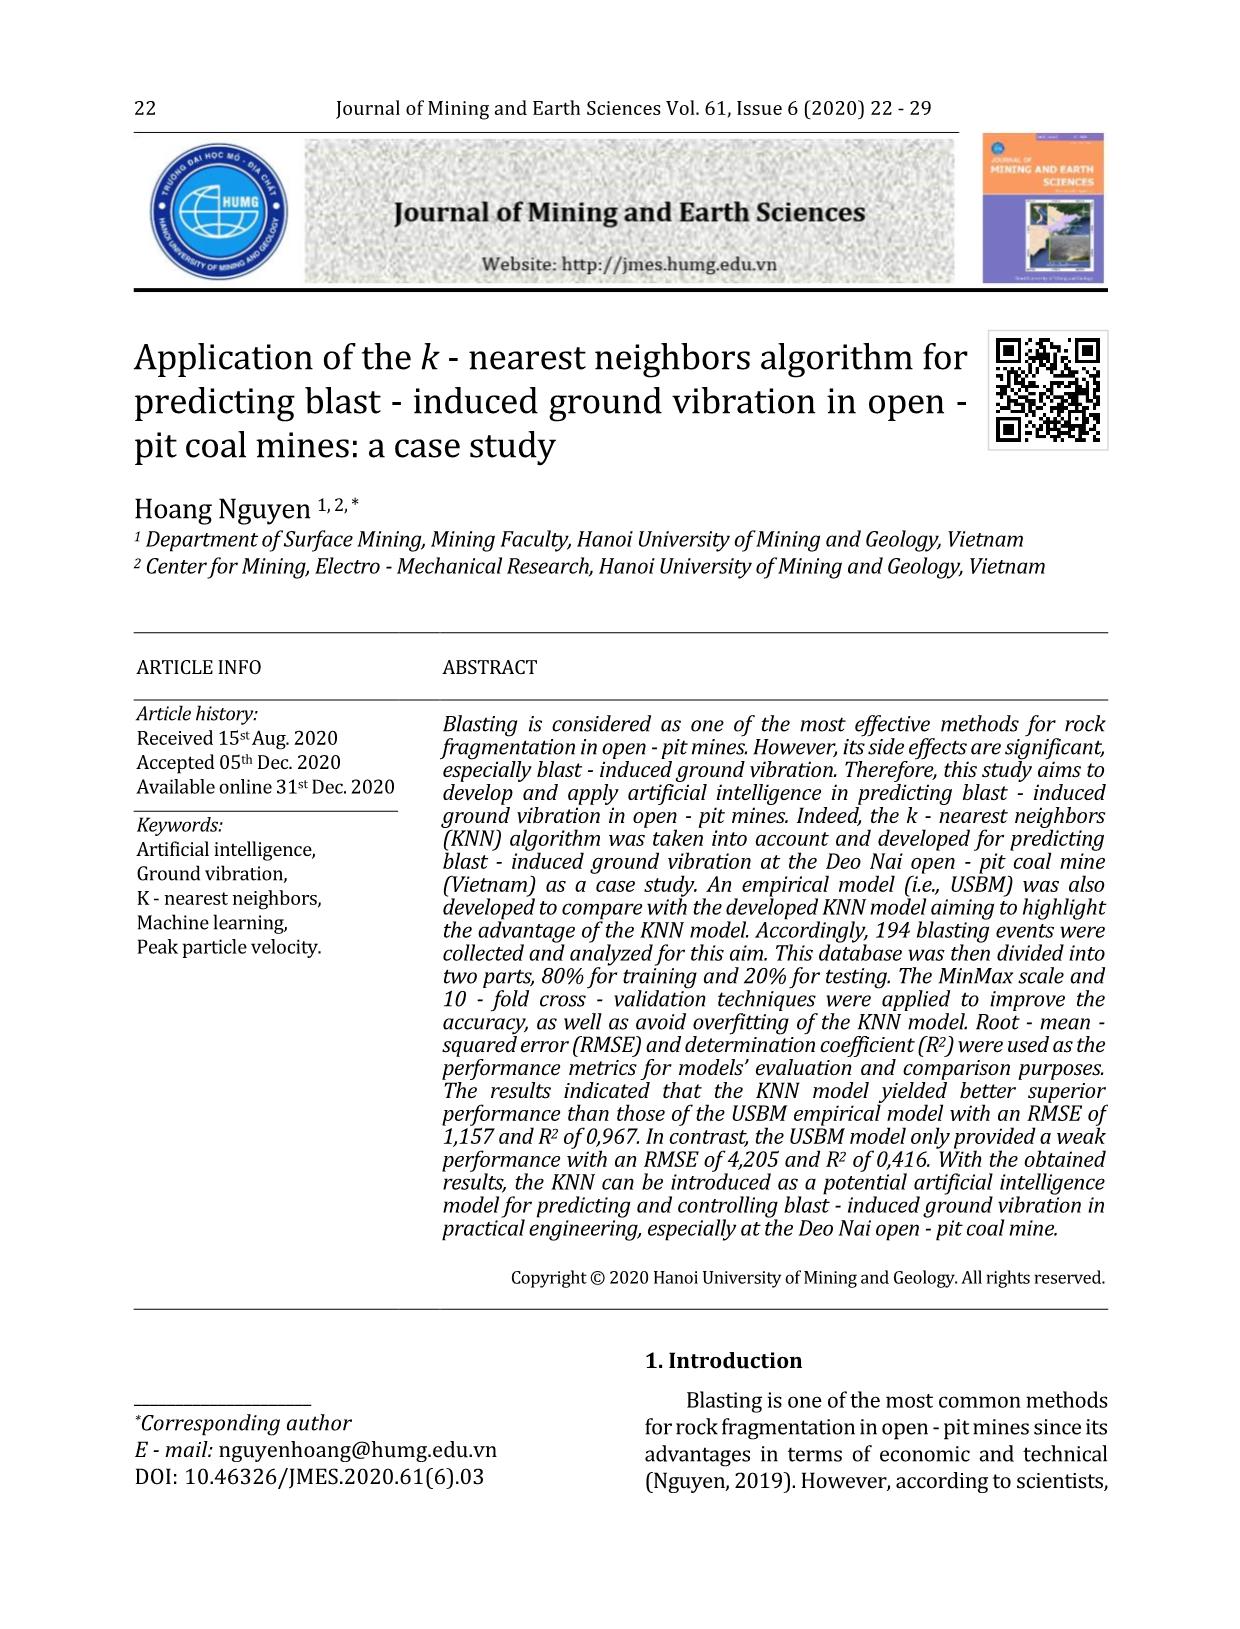 Application of the k - Nearest neighbors algorithm for predicting blast - induced ground vibration in open - pit coal mines: a case study trang 1